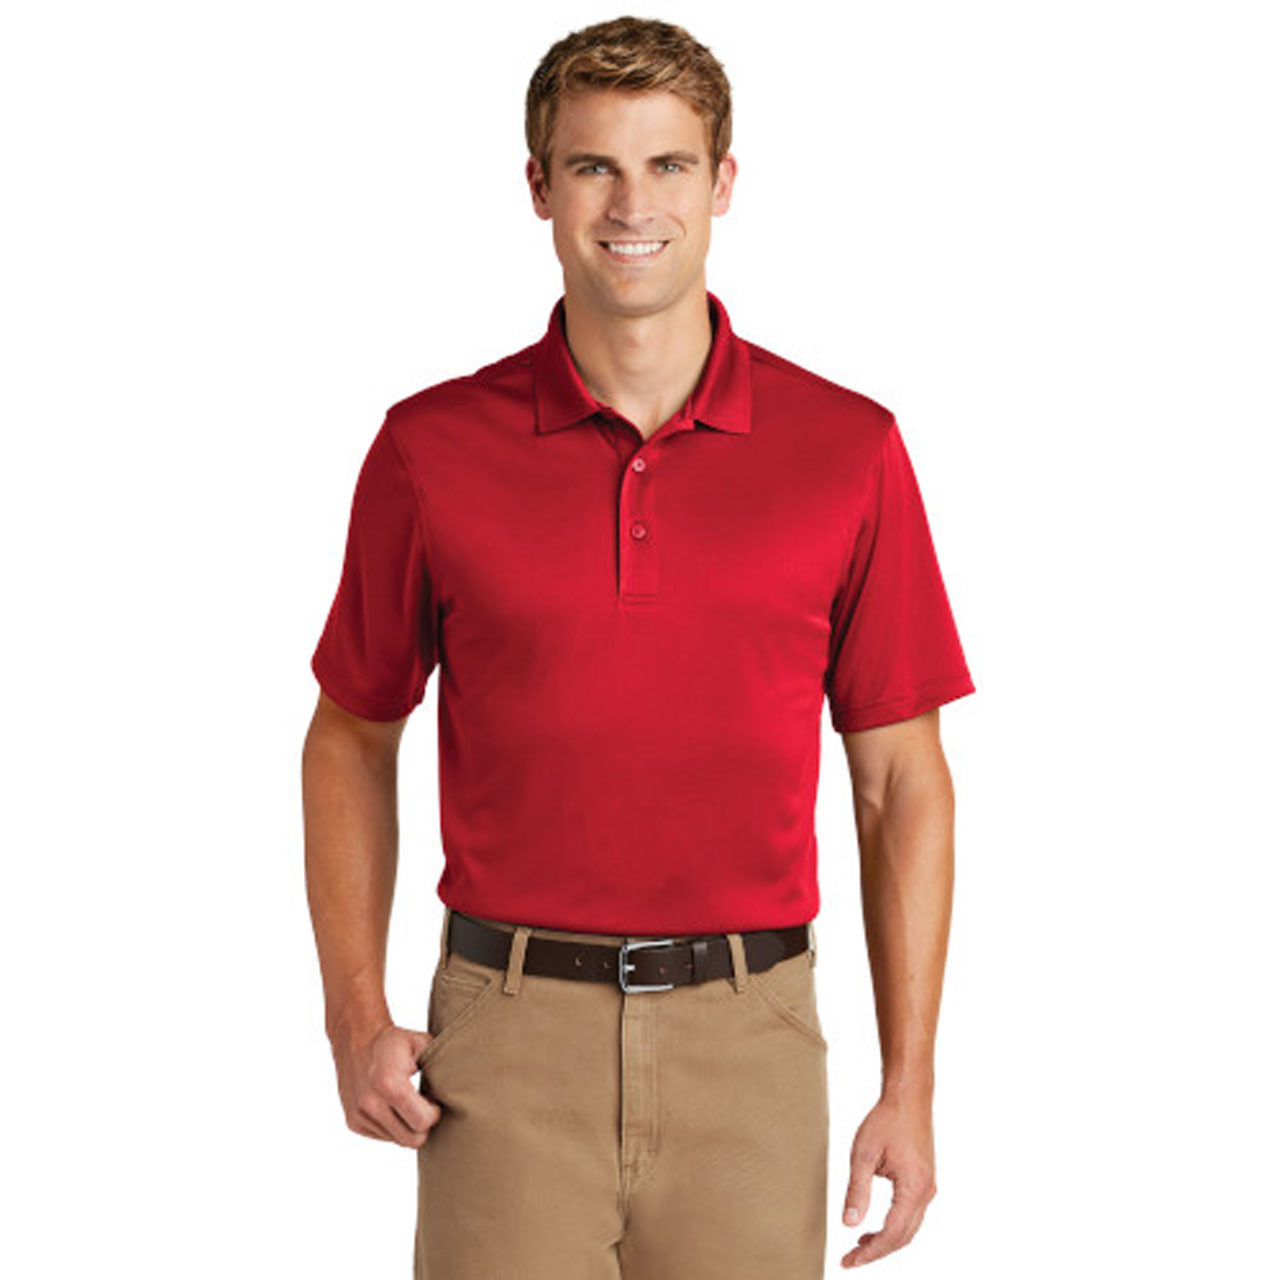 Are there alternative wholesale polo s colors besides red for men?